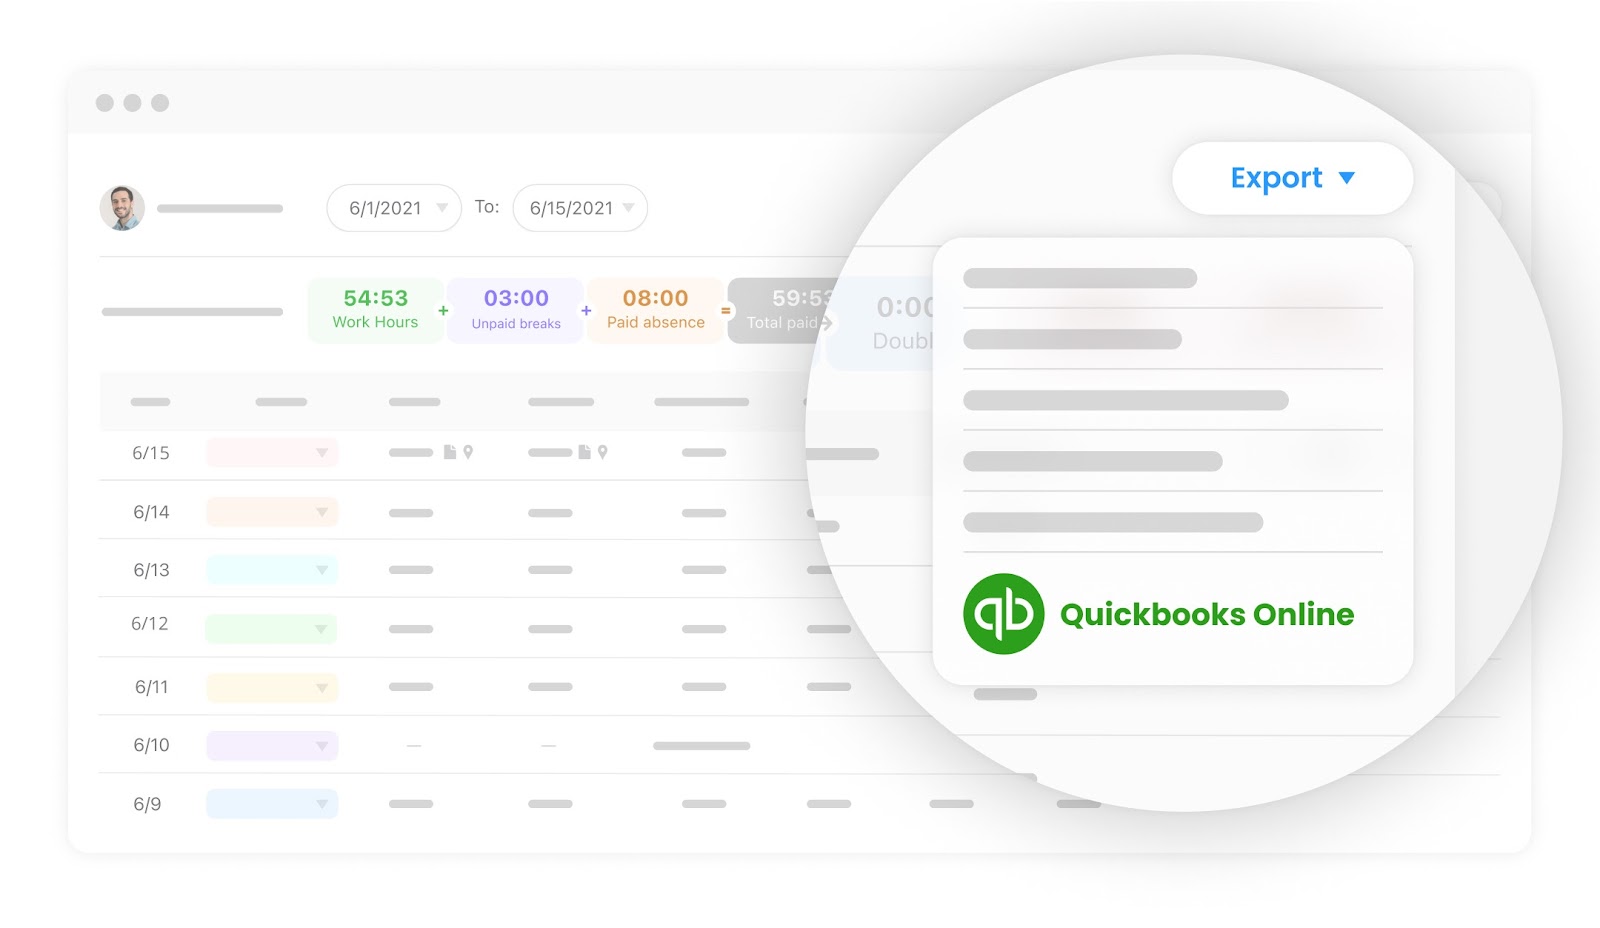 Connecteam quickbooks online integration (how to export timesheets)